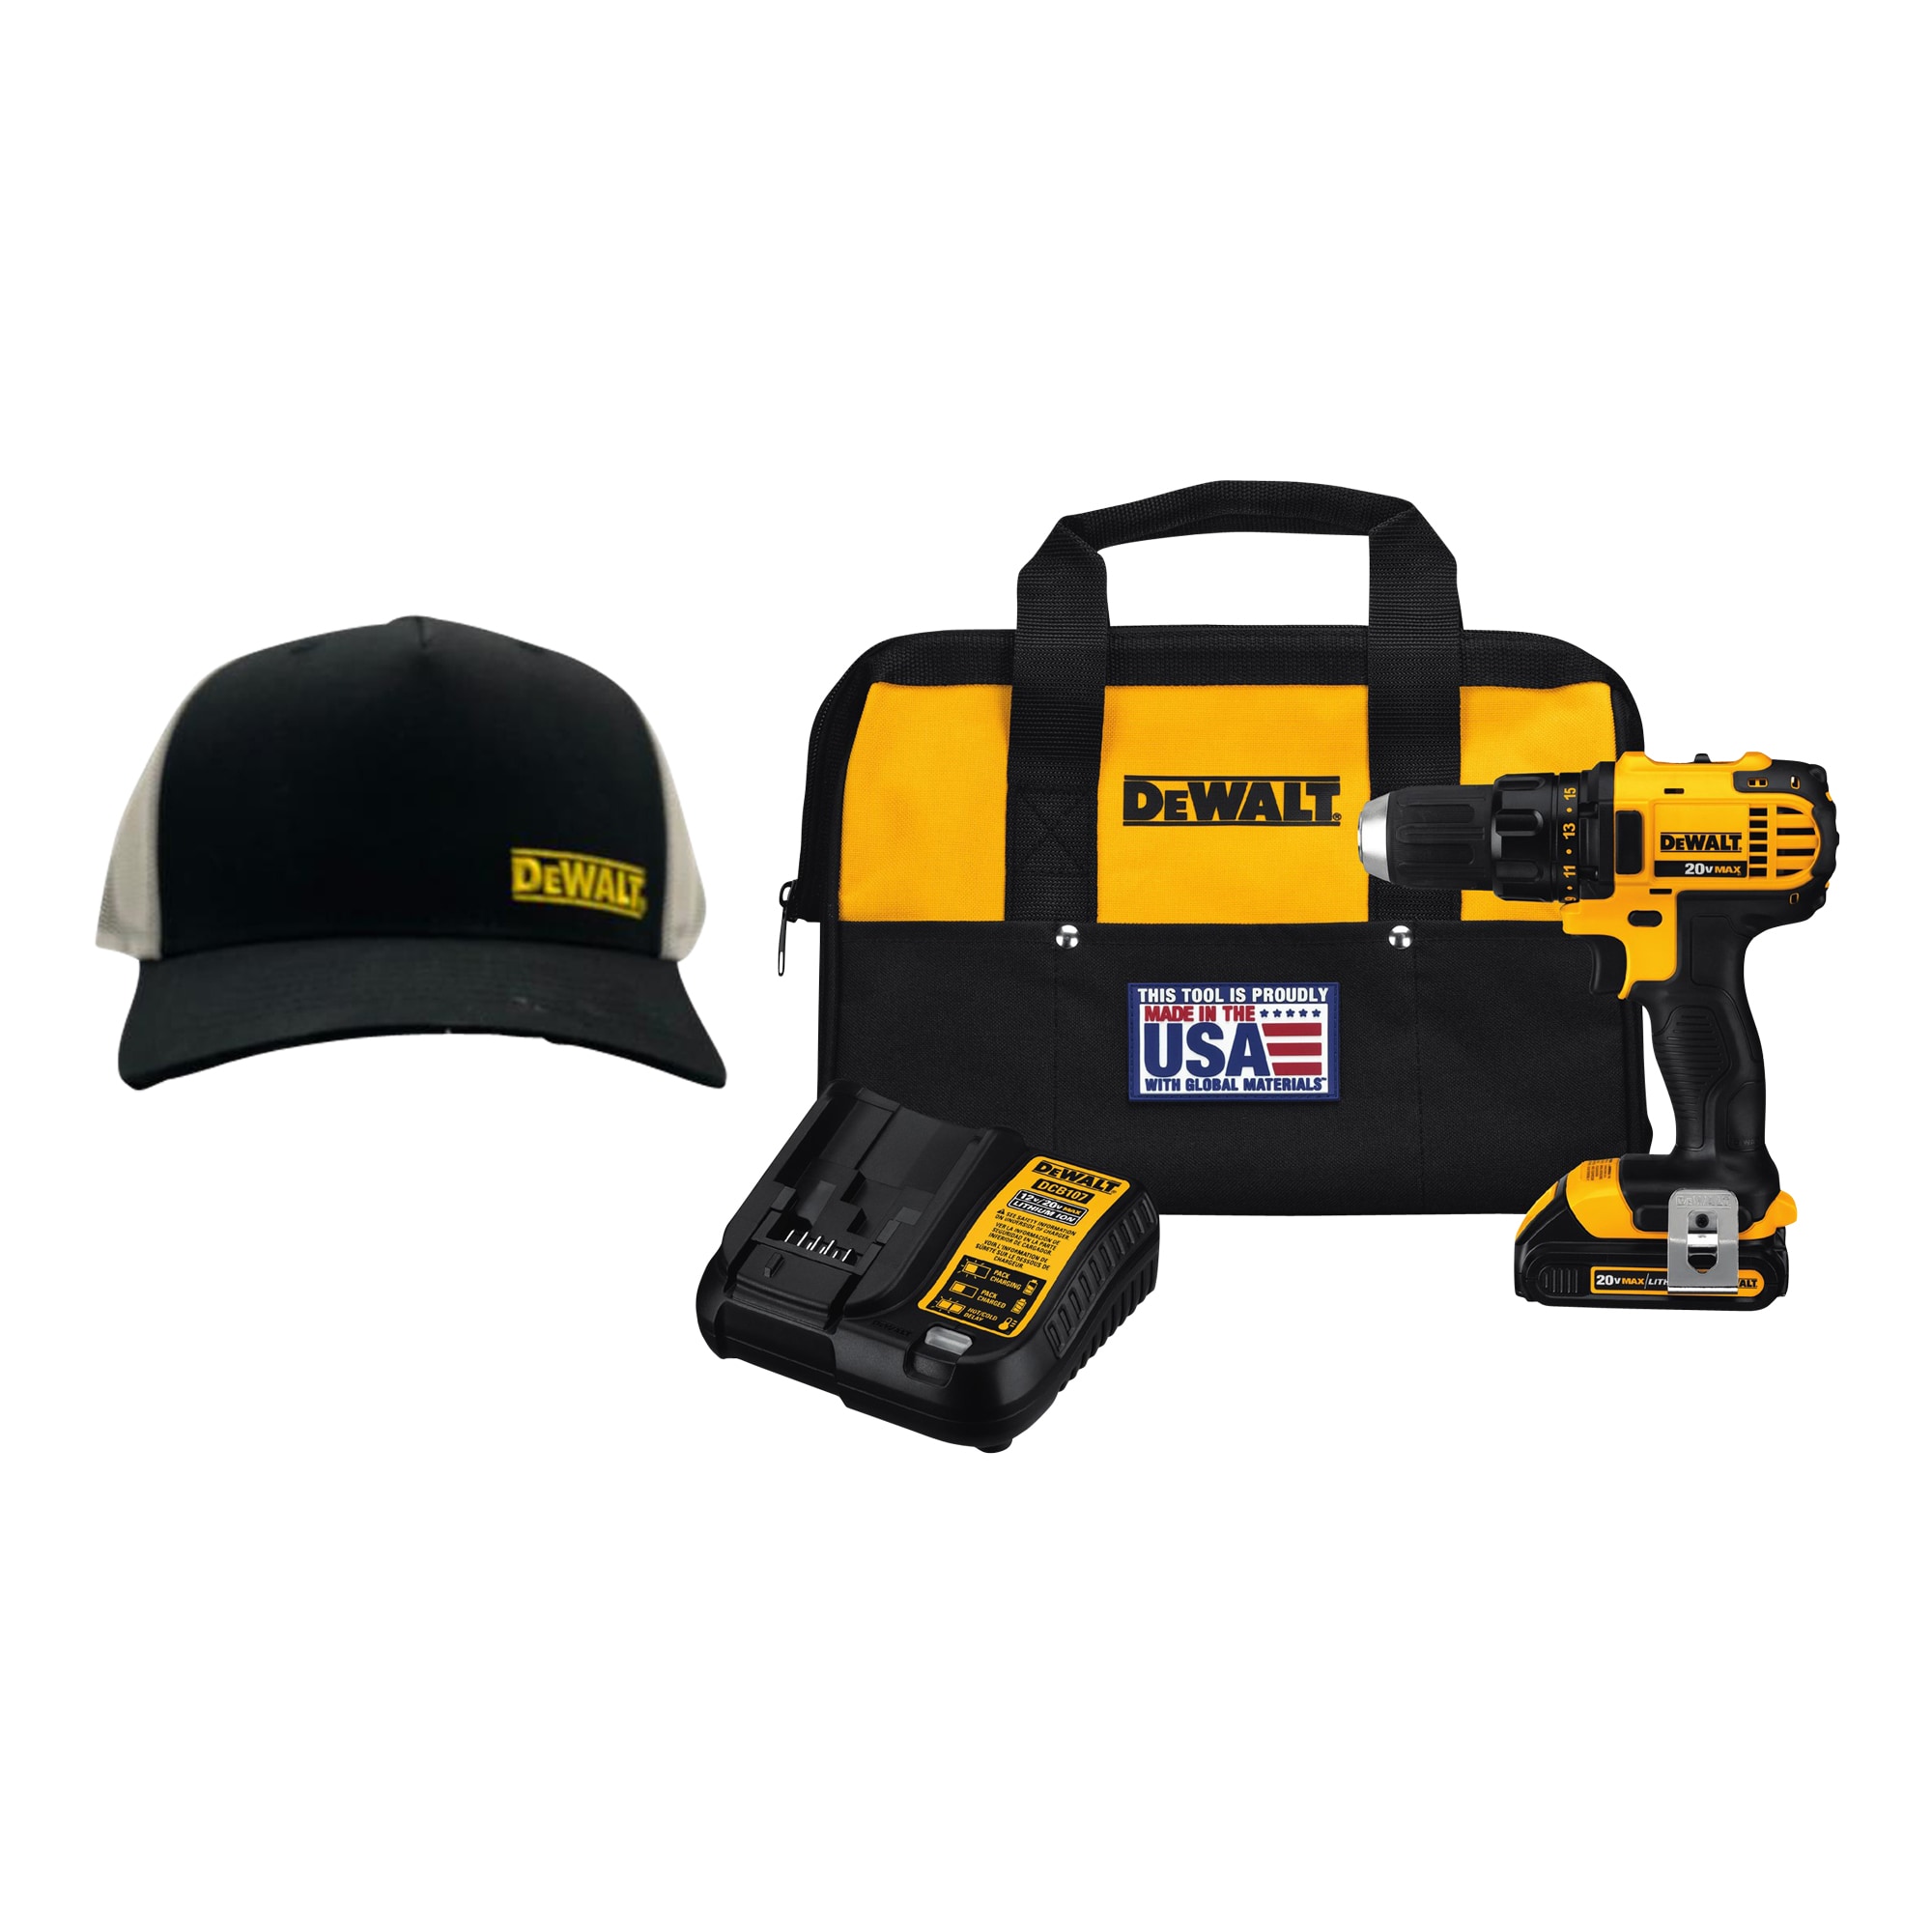 DEWALT 20-volt Max 1/2-in Brushless Cordless Drill (2-Batteries Included and Charger Included) & Black and Yellow Mesh Back Trucker Hat